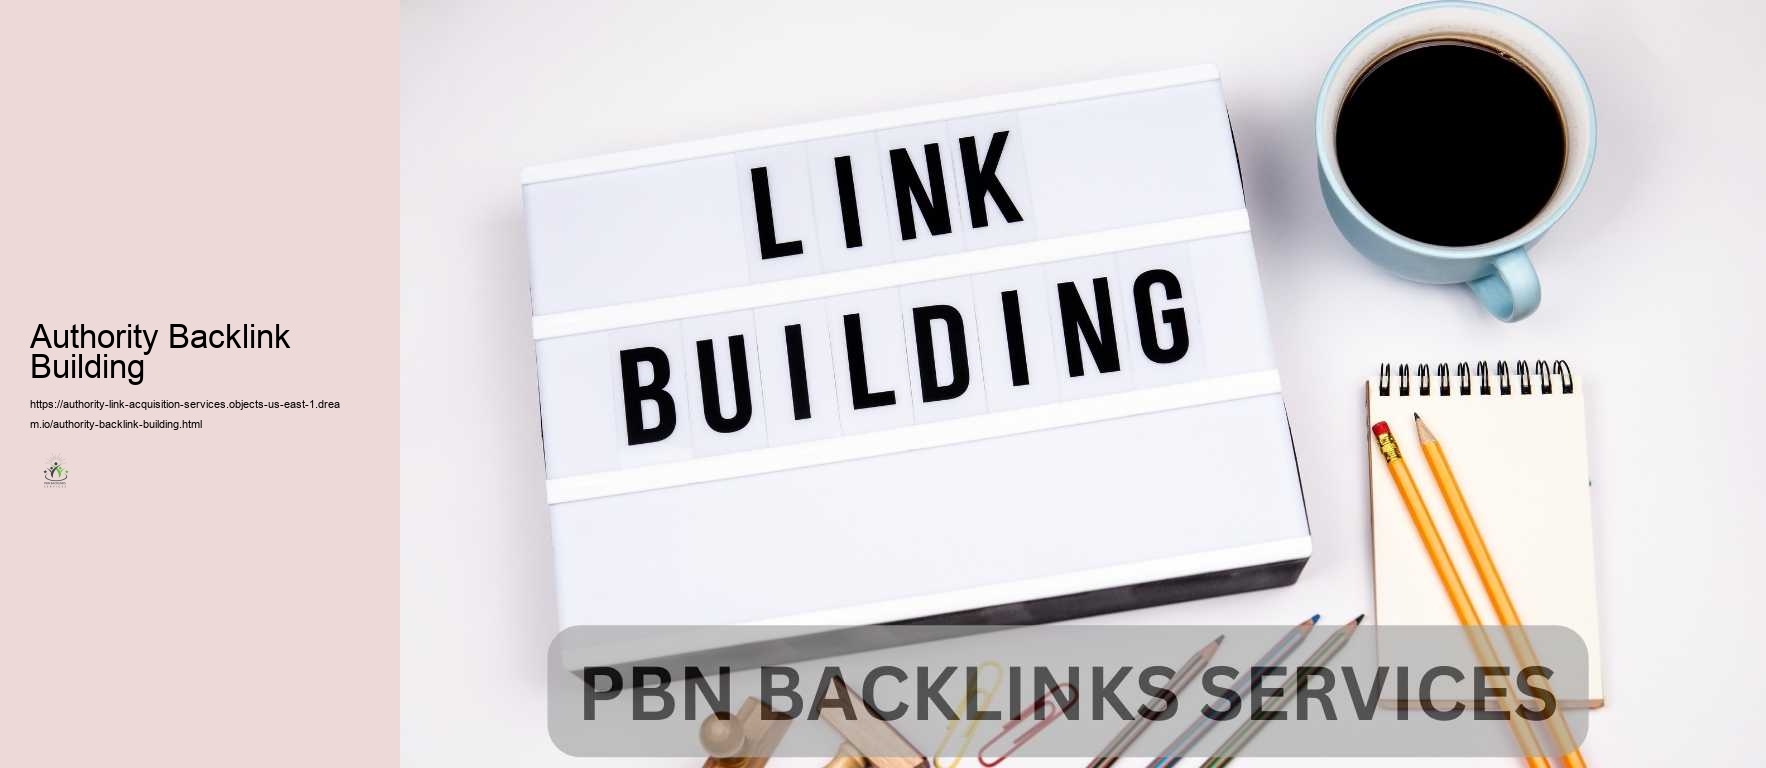 Authority Backlink Building